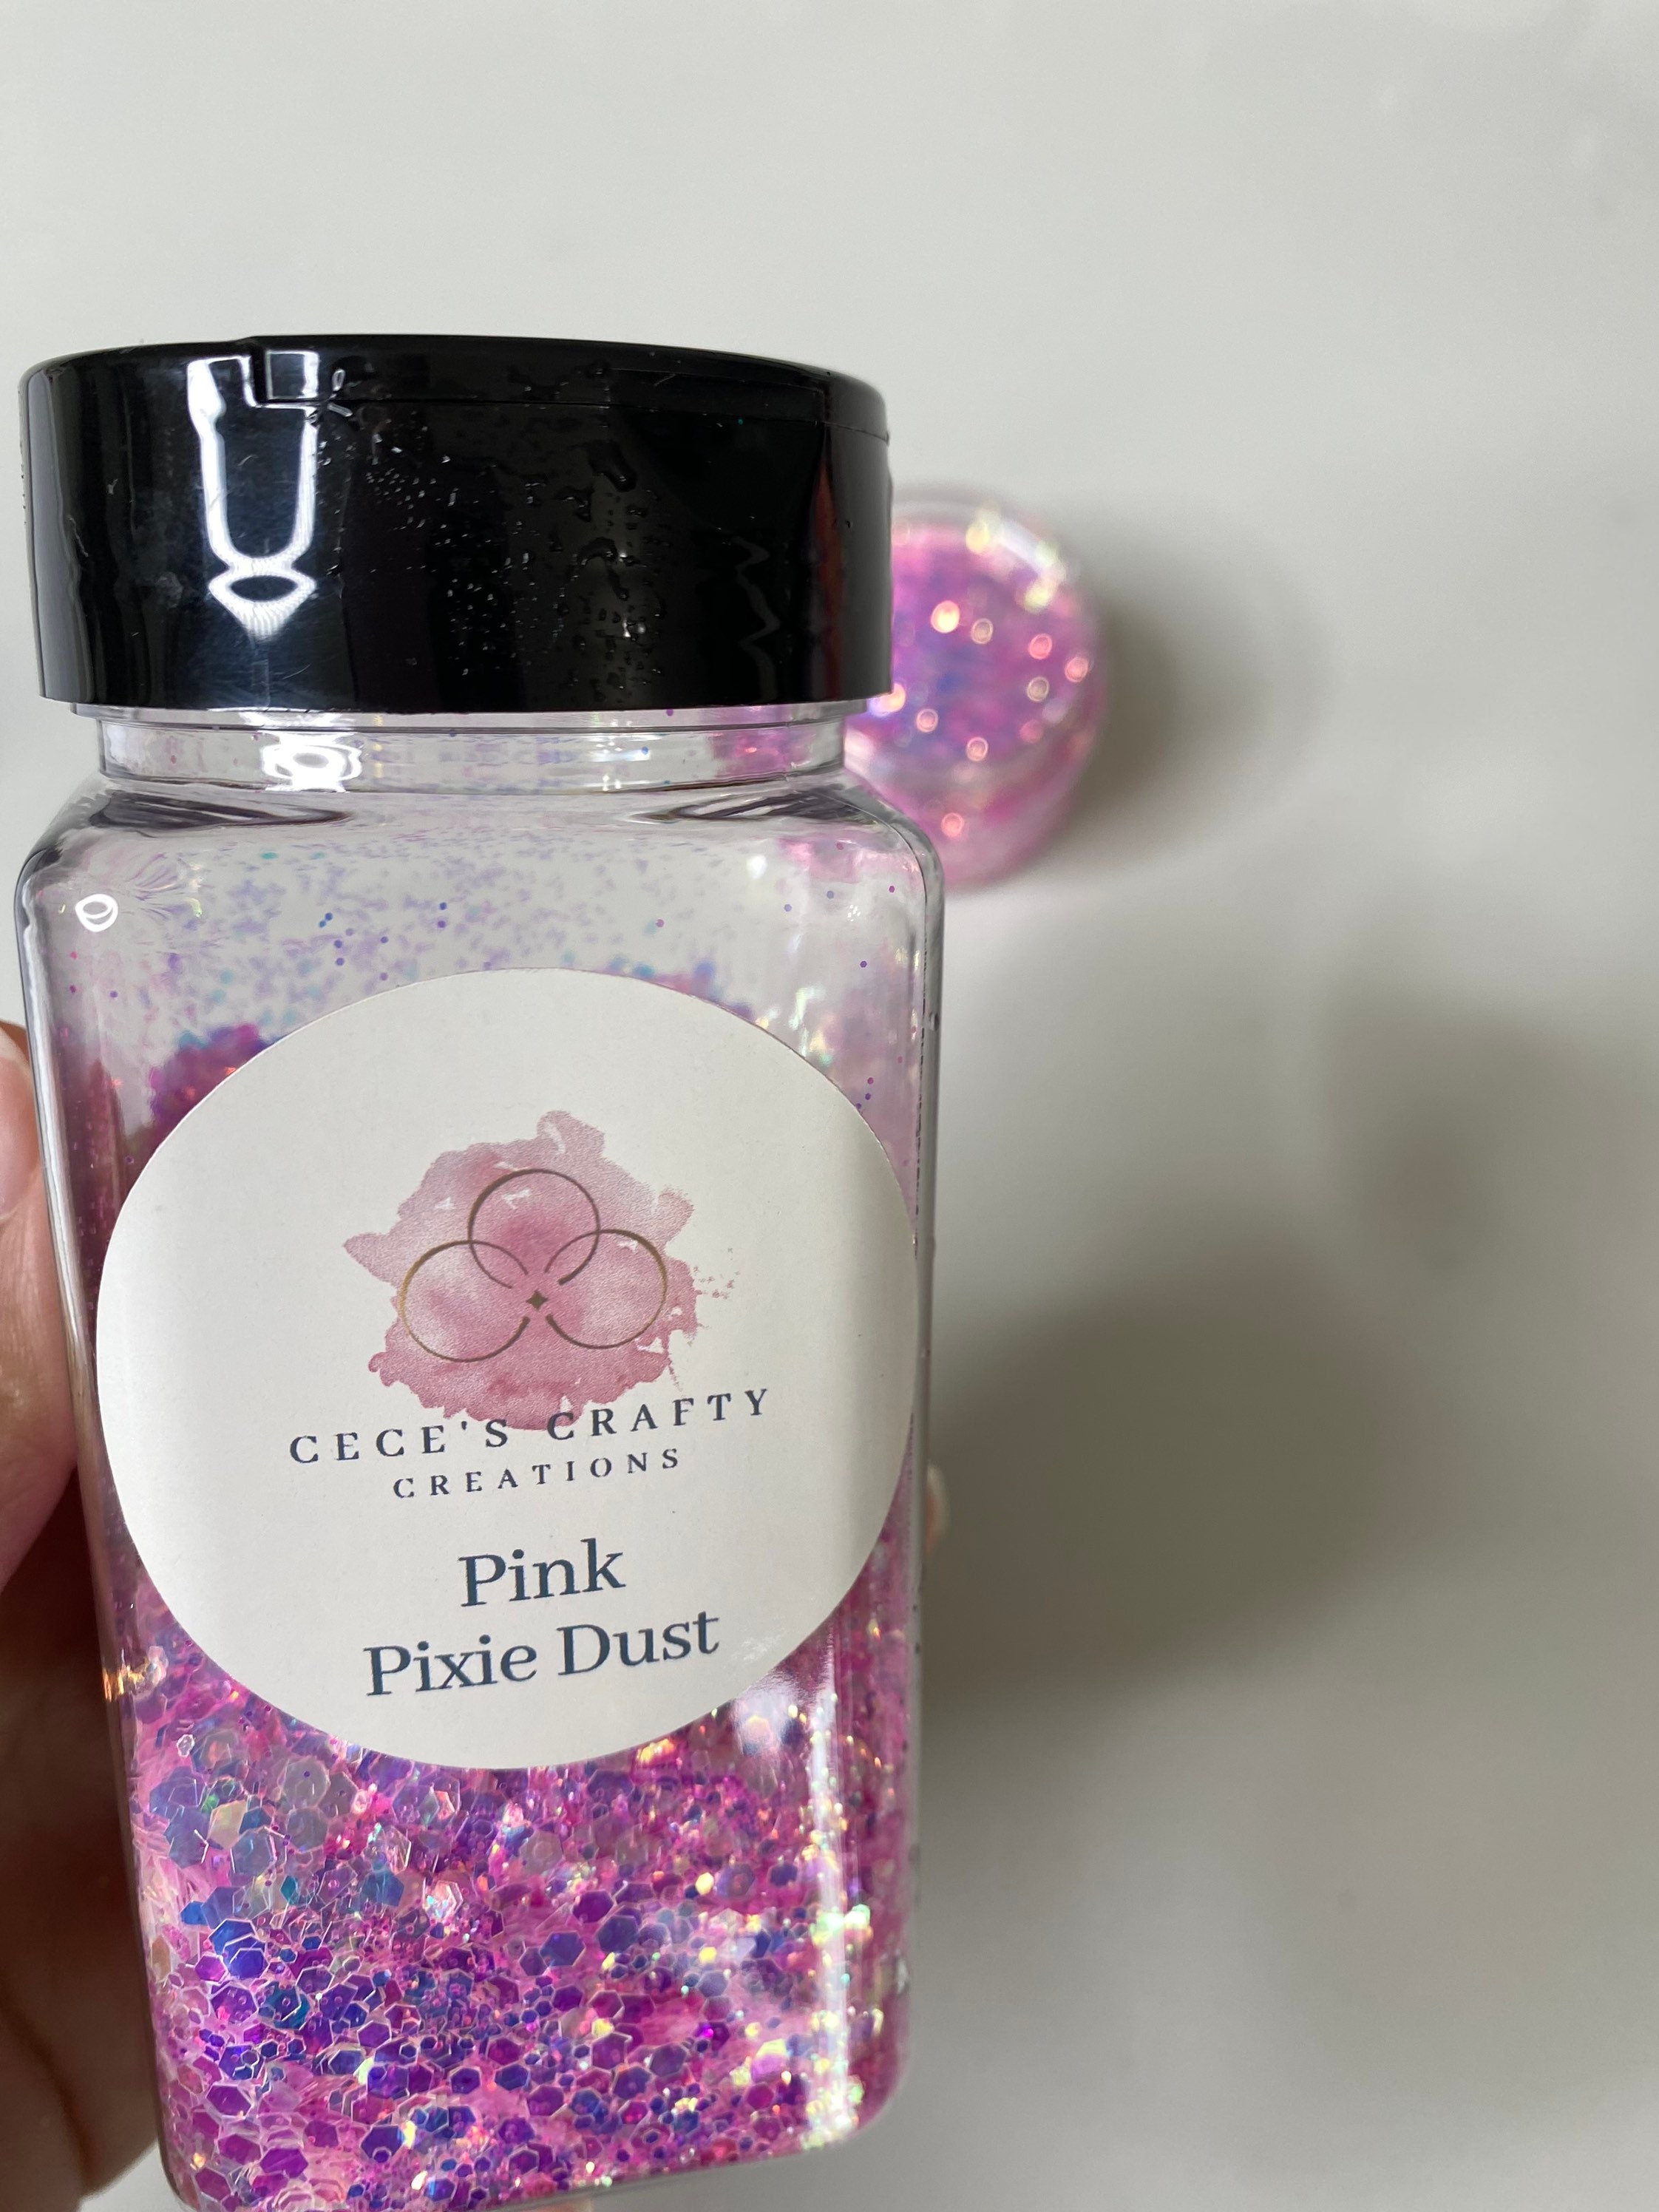 Chunky Hot Pink - Glitter & Pixie Dust Exclusive! 2 oz pink chunky glitter  - NEW!